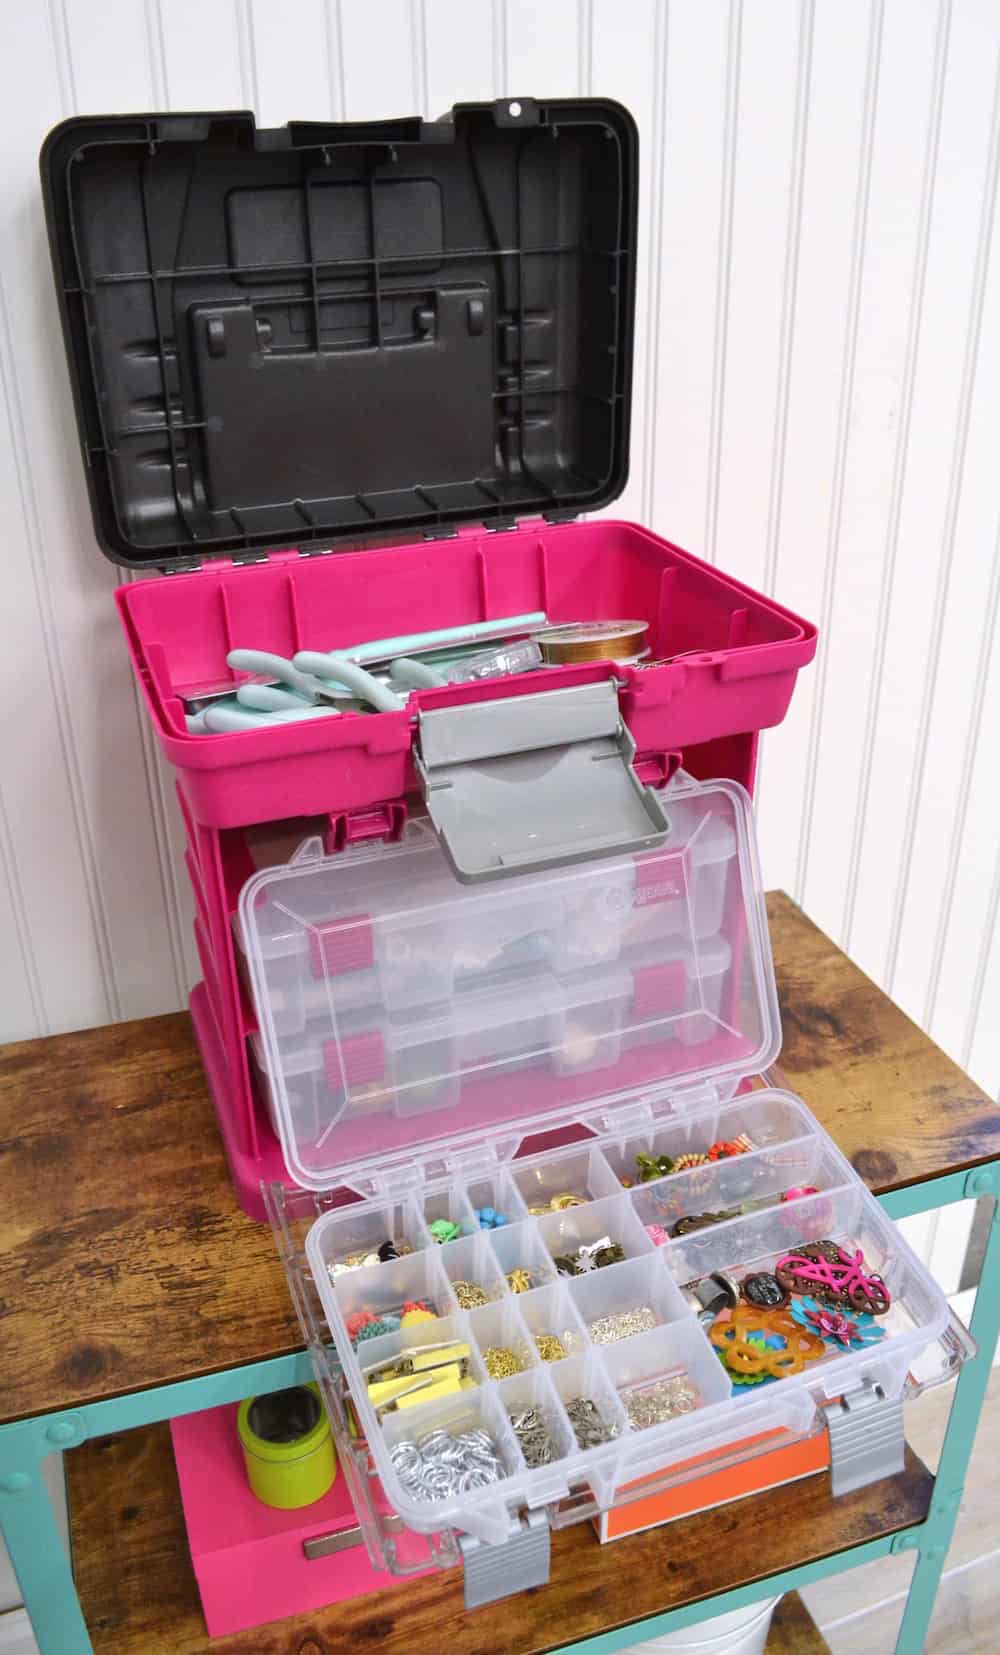 Organizing Jewelry Supplies: Five Top Tips You'll Use! - DIY Candy